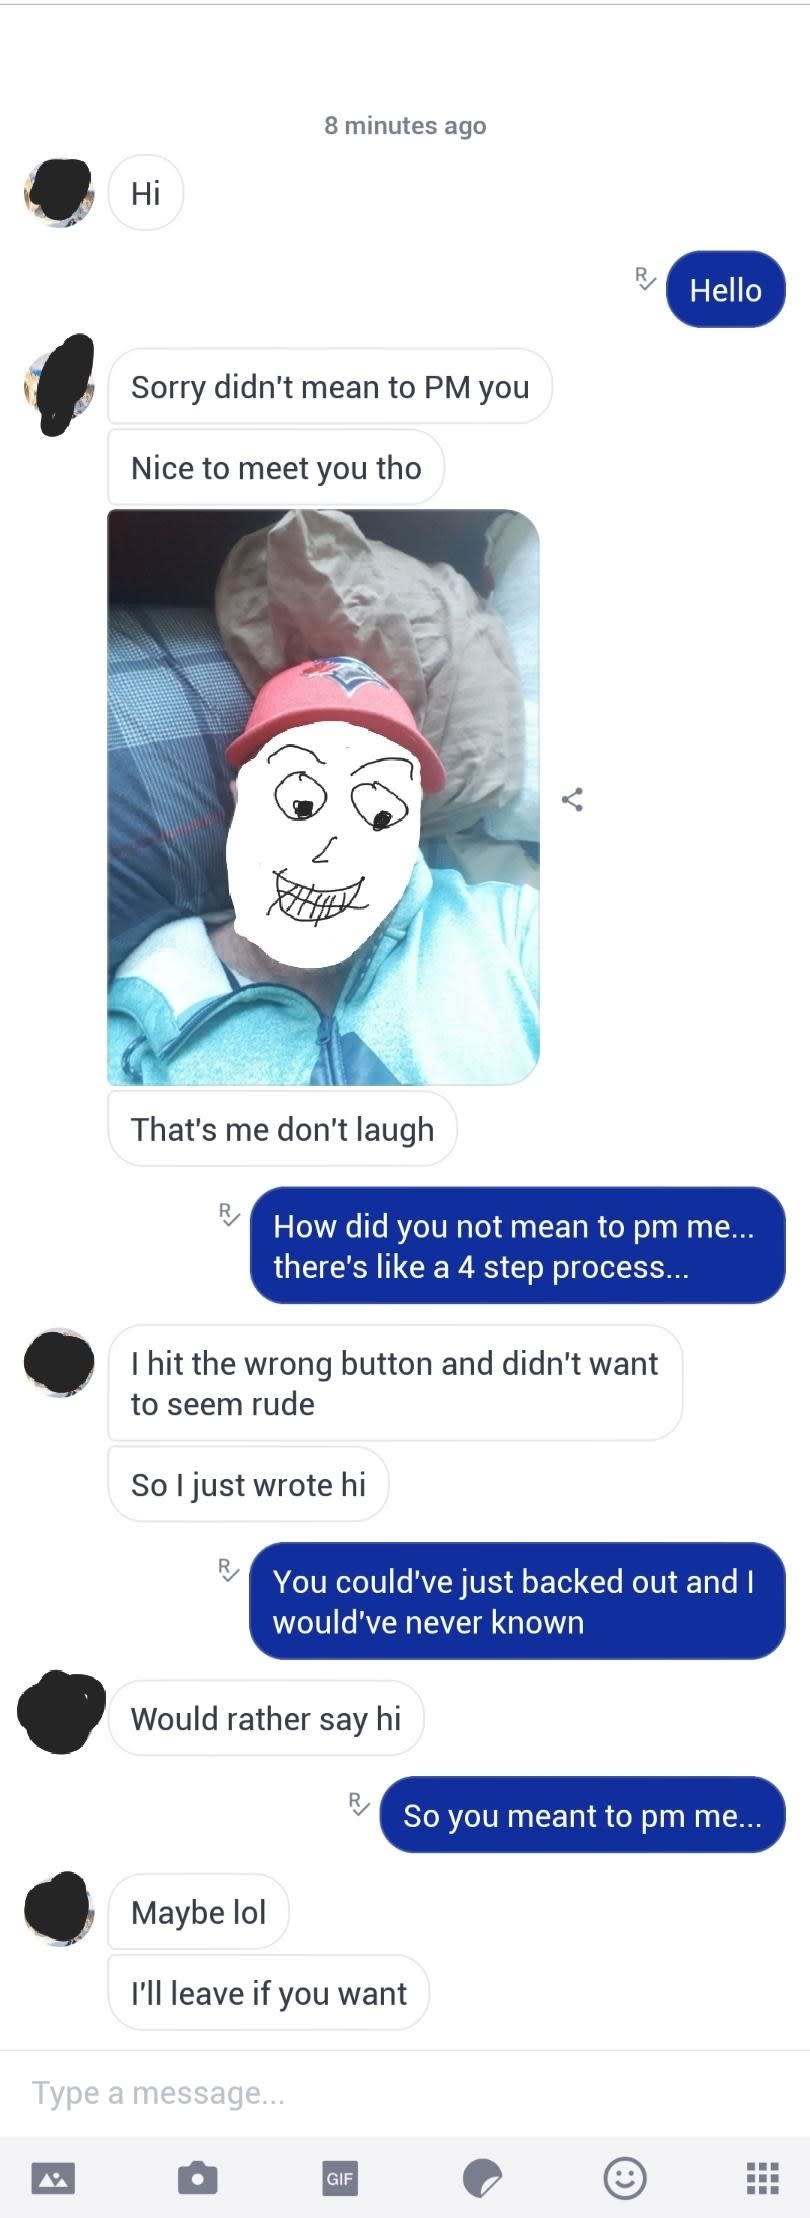 Person sends a PM with a photo, saying they didn't mean to PM the person but hi anyway, and when they're asked how they could do a "four-step process" accidentally, they say they hit the wrong button